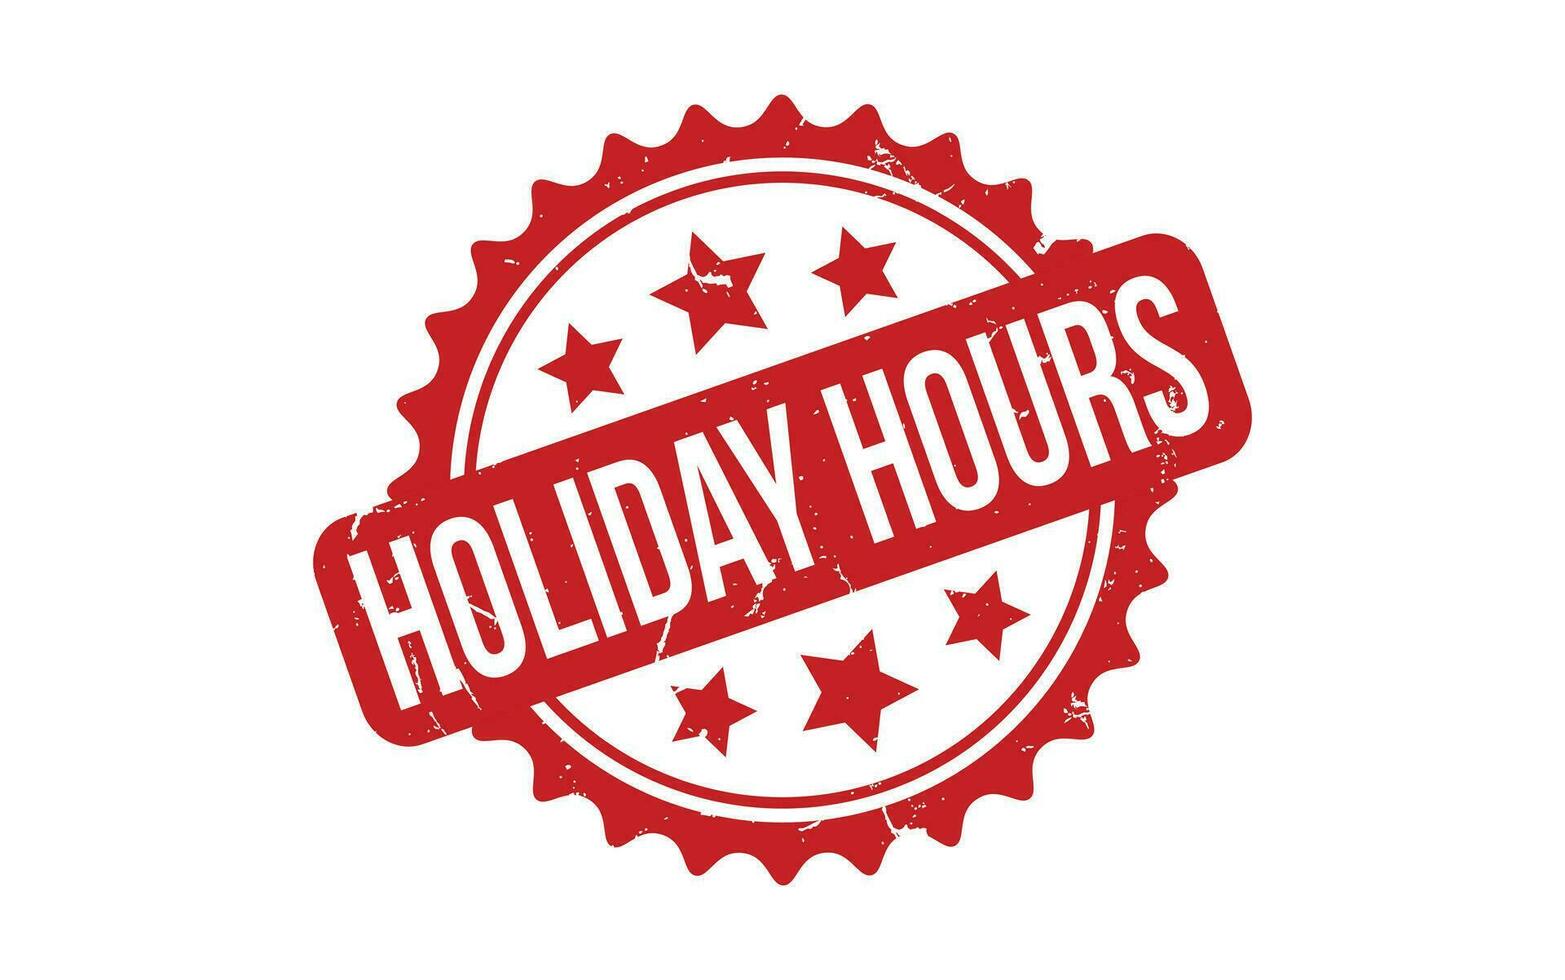 Holiday Hours rubber grunge stamp seal vector